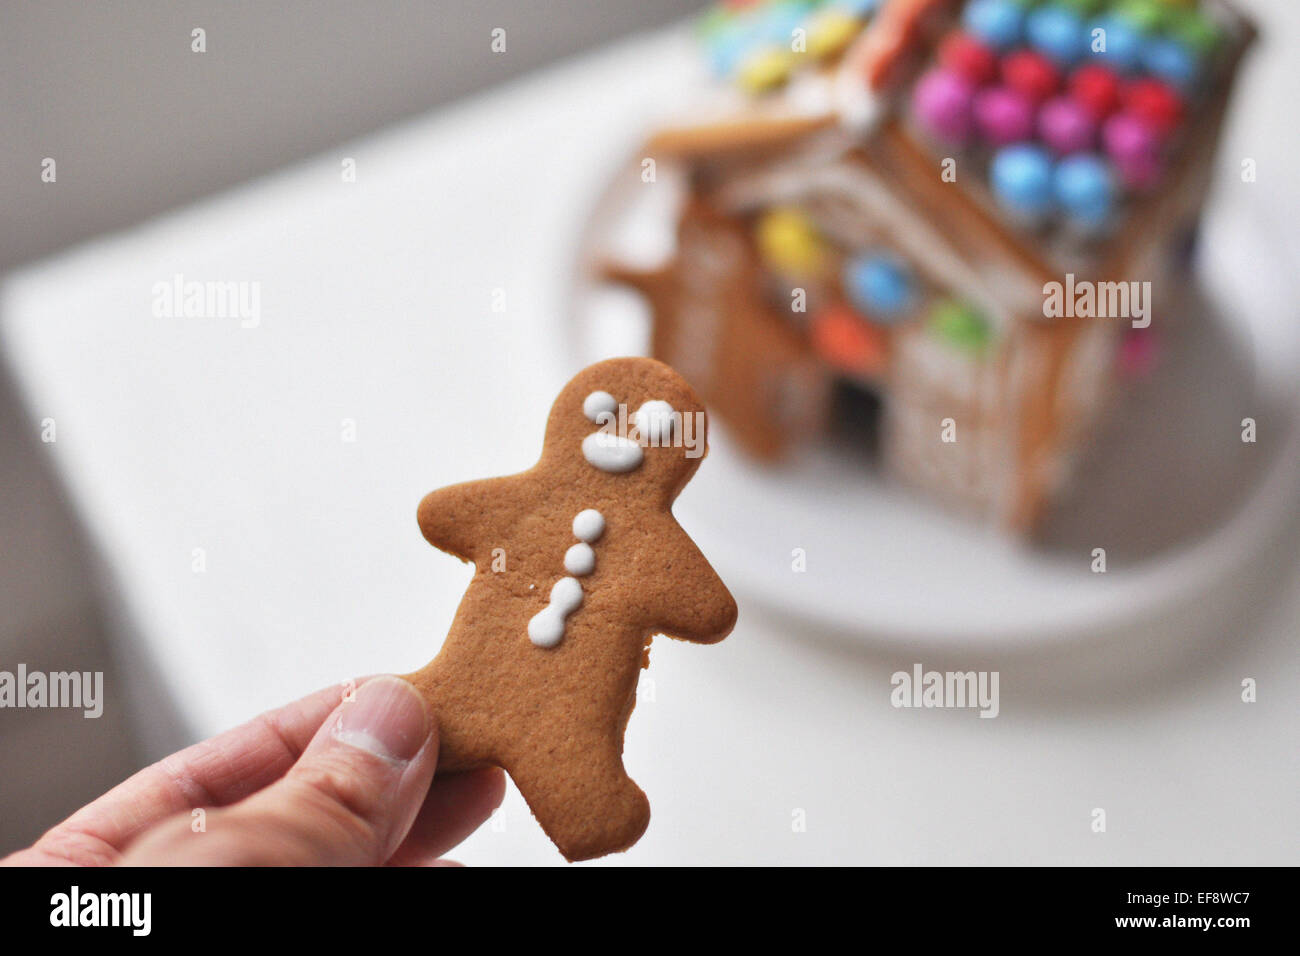 Person's hand holding gingerbread man, gingerbread house in background Stock Photo